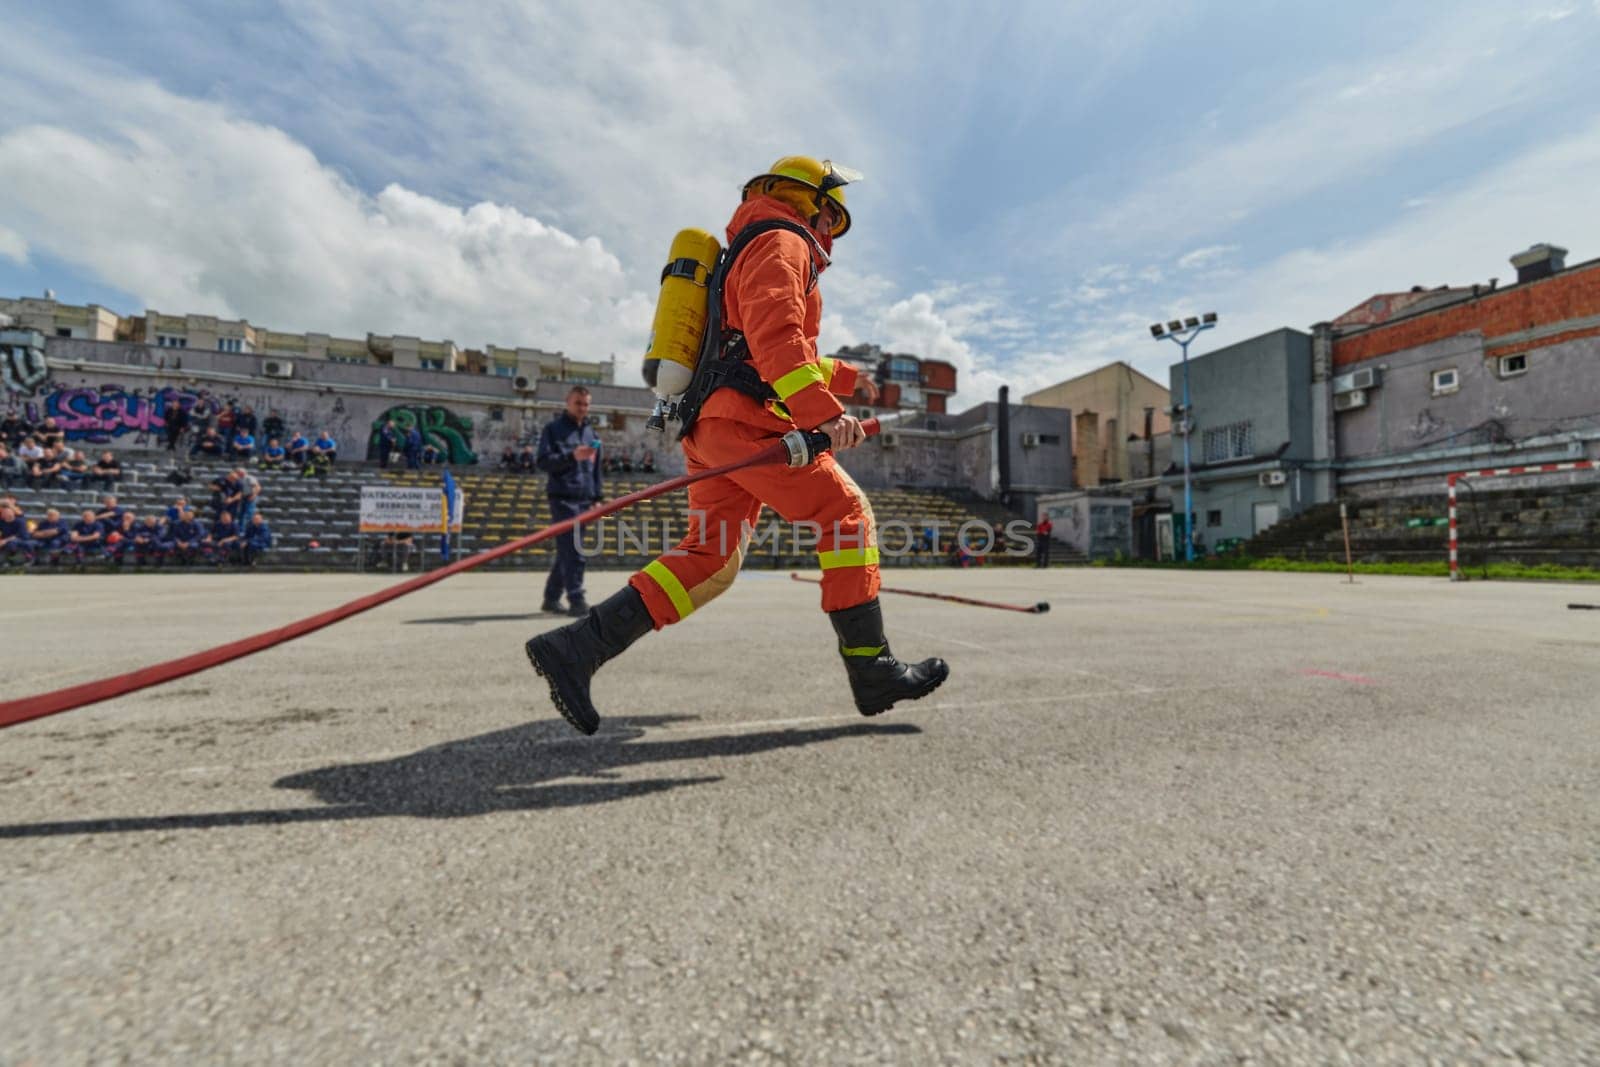 In a dynamic display of synchronized teamwork, firefighters hustle to carry, connect, and deploy firefighting hoses with precision, showcasing their intensive training and readiness for challenging and high-risk situations ahead by dotshock